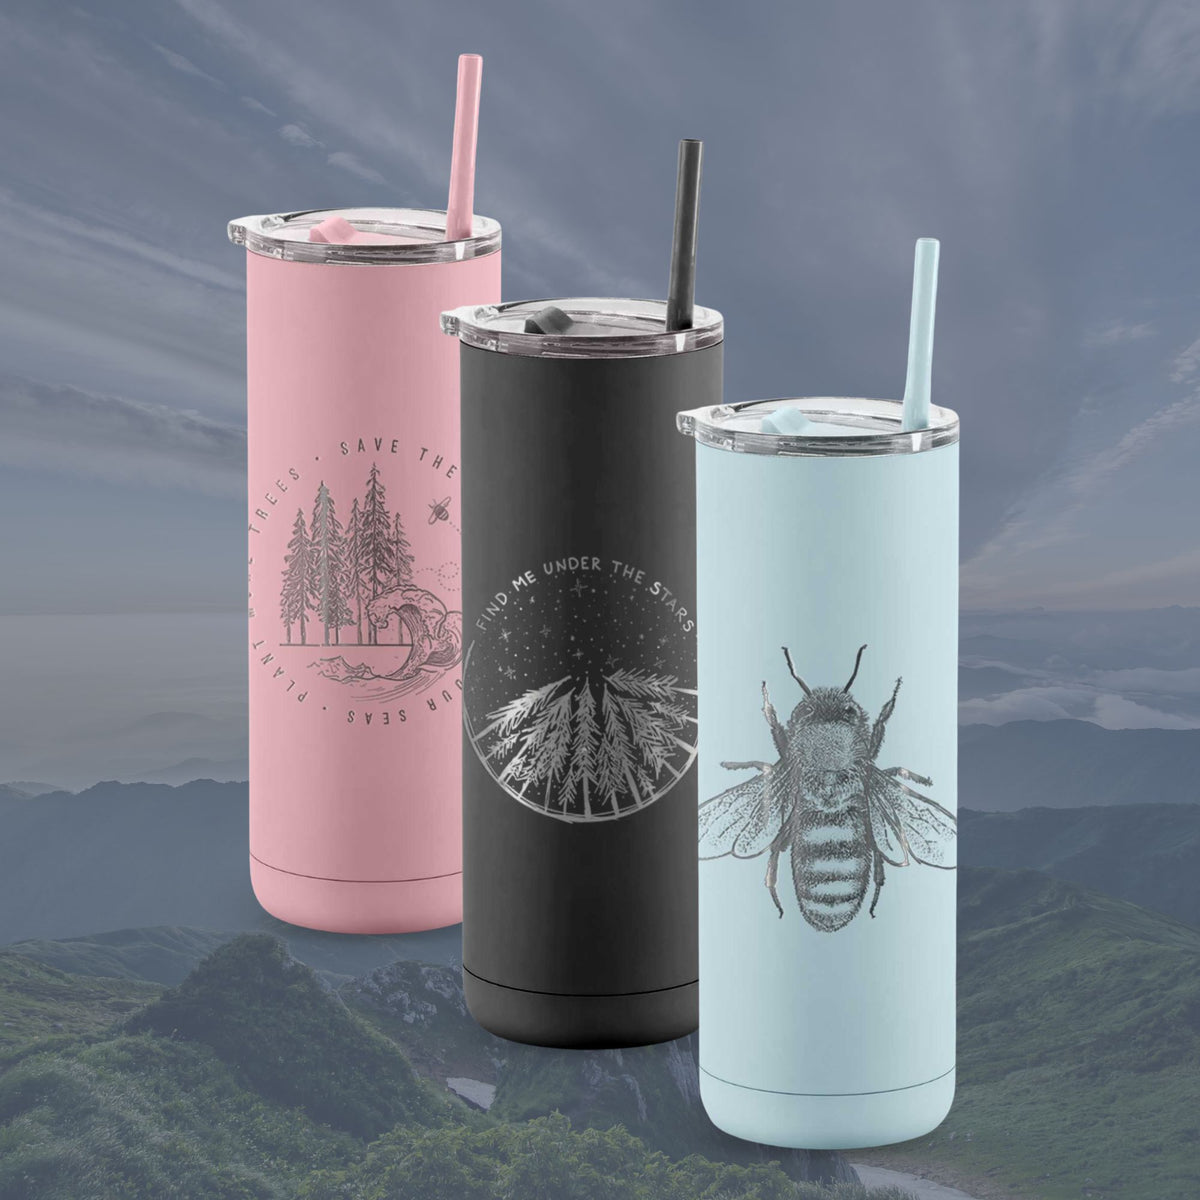 Sage green Tumbler, 20oz Tumbler with Lids and Straws  insulated tumblers Stainless Steel Vacuum Insulated Travel Mug Double Wall  Water Coffee Tumbler: Tumblers & Water Glasses